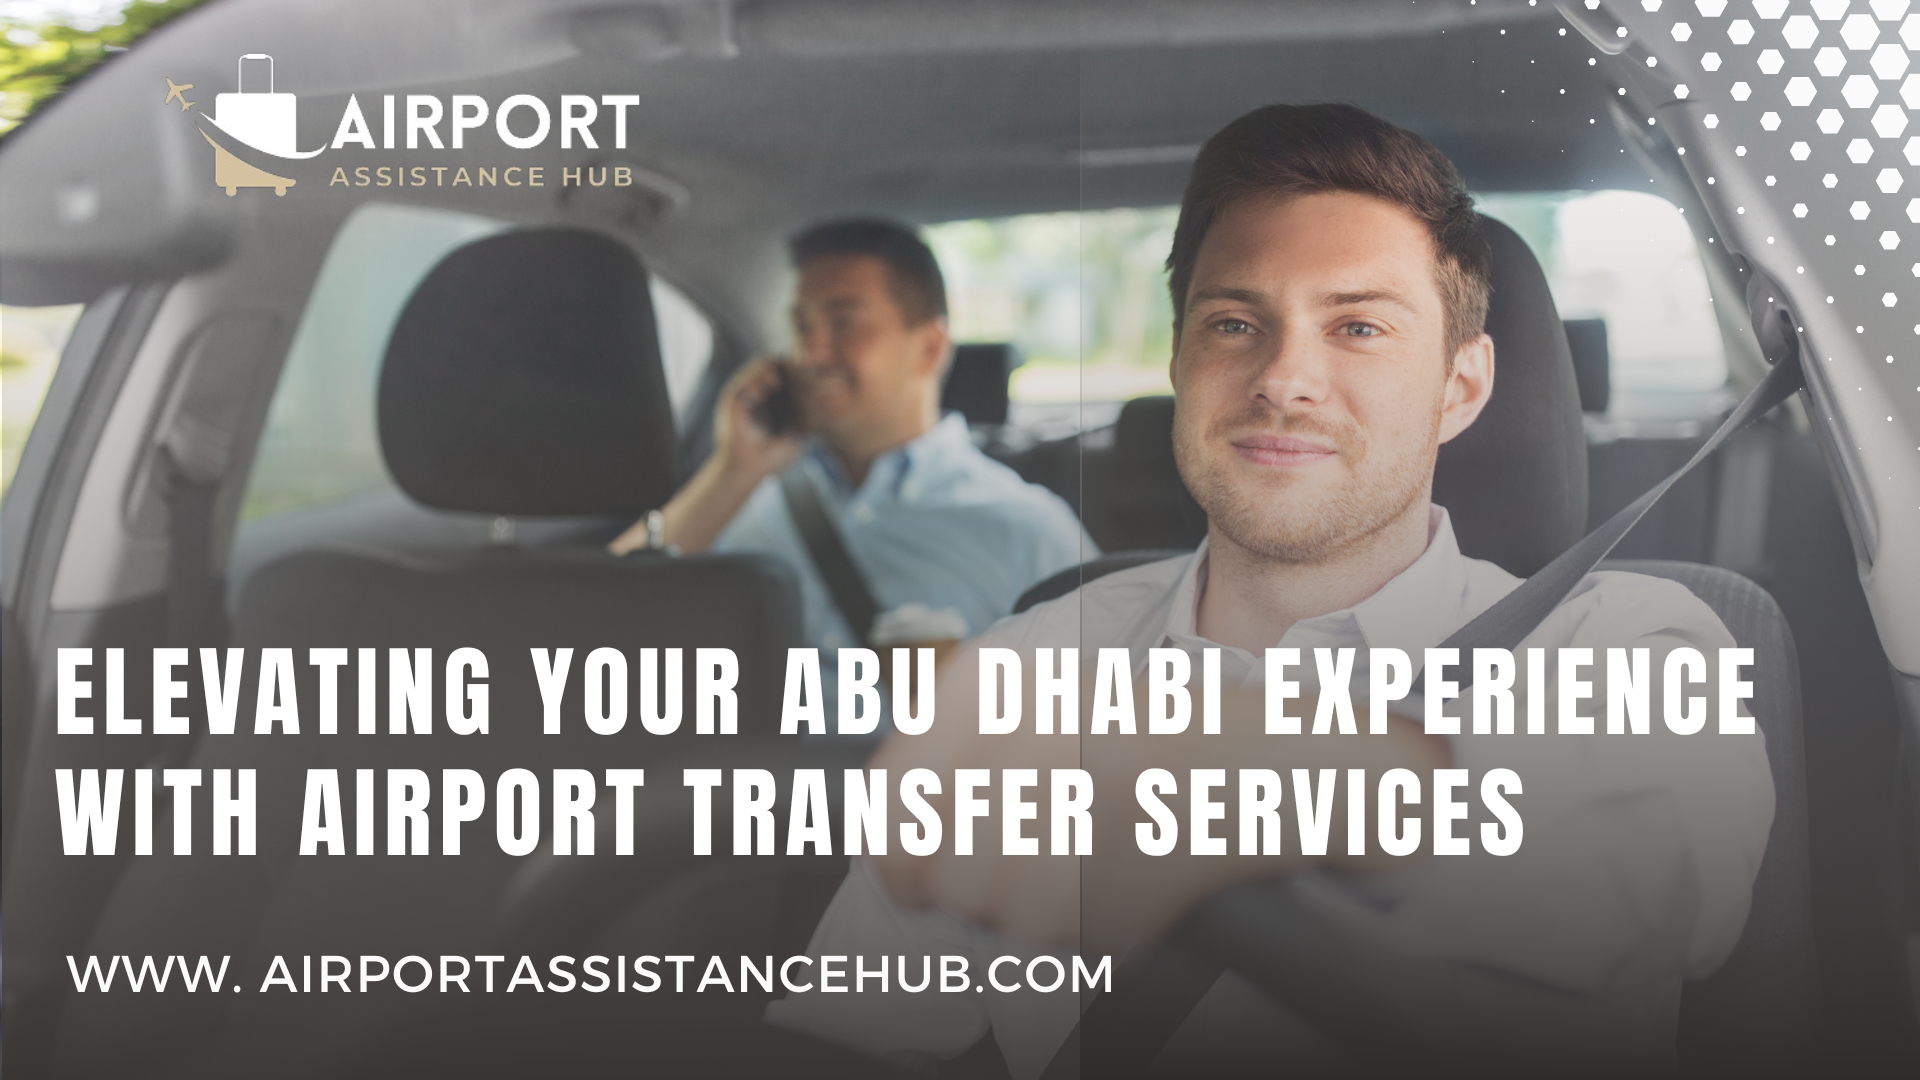 Abu Dhabi Airport Transfer Services